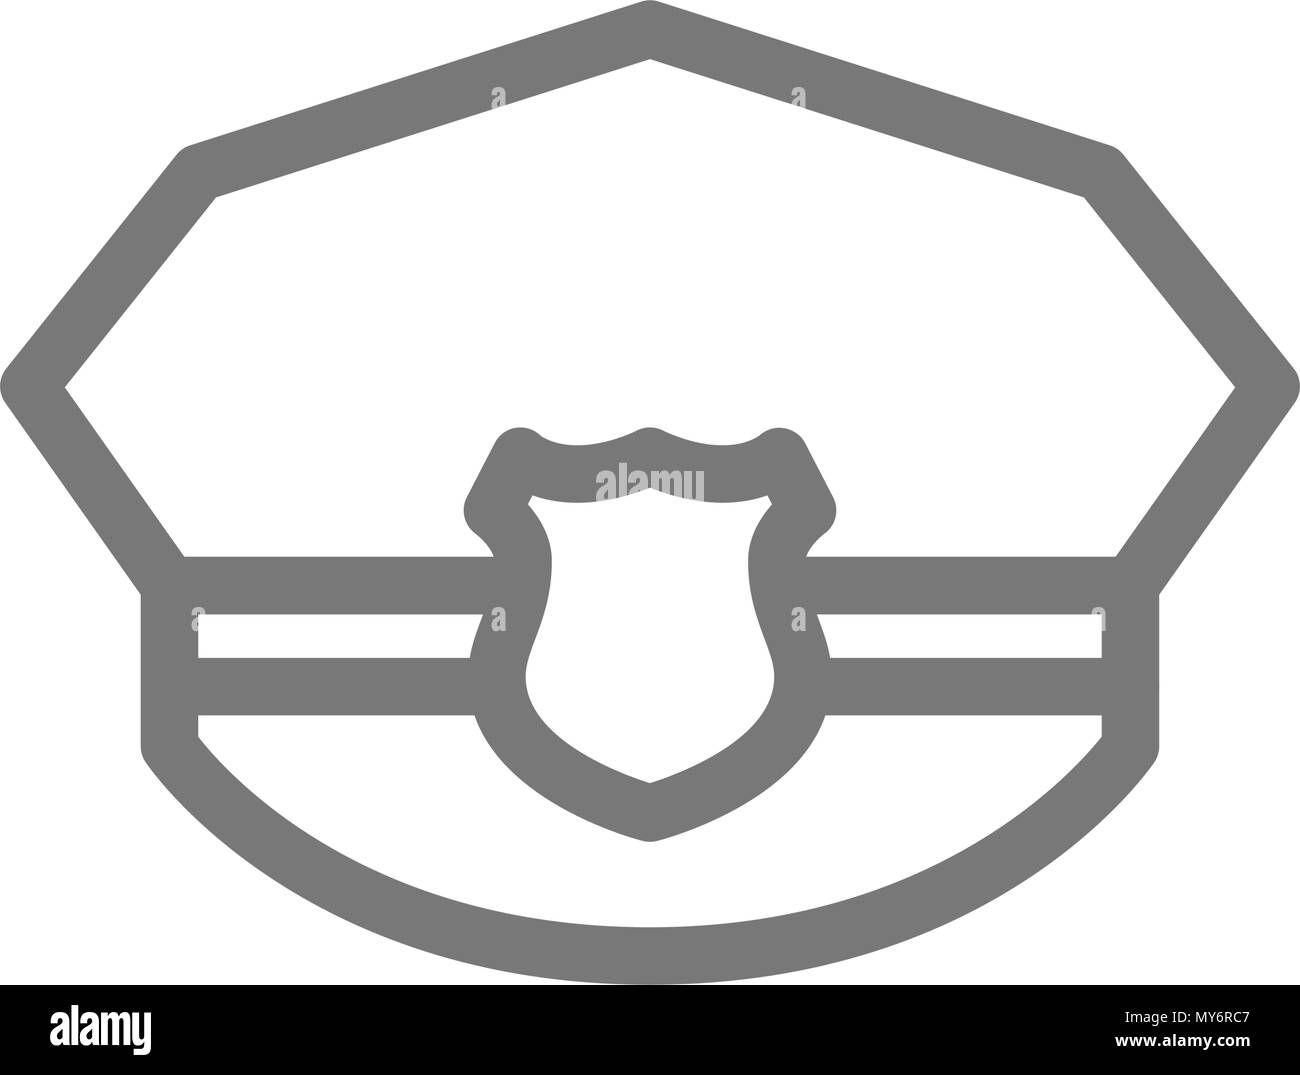 Simple police hat line icon. Symbol and sign vector illustration design. Isolated on white background Stock Vector